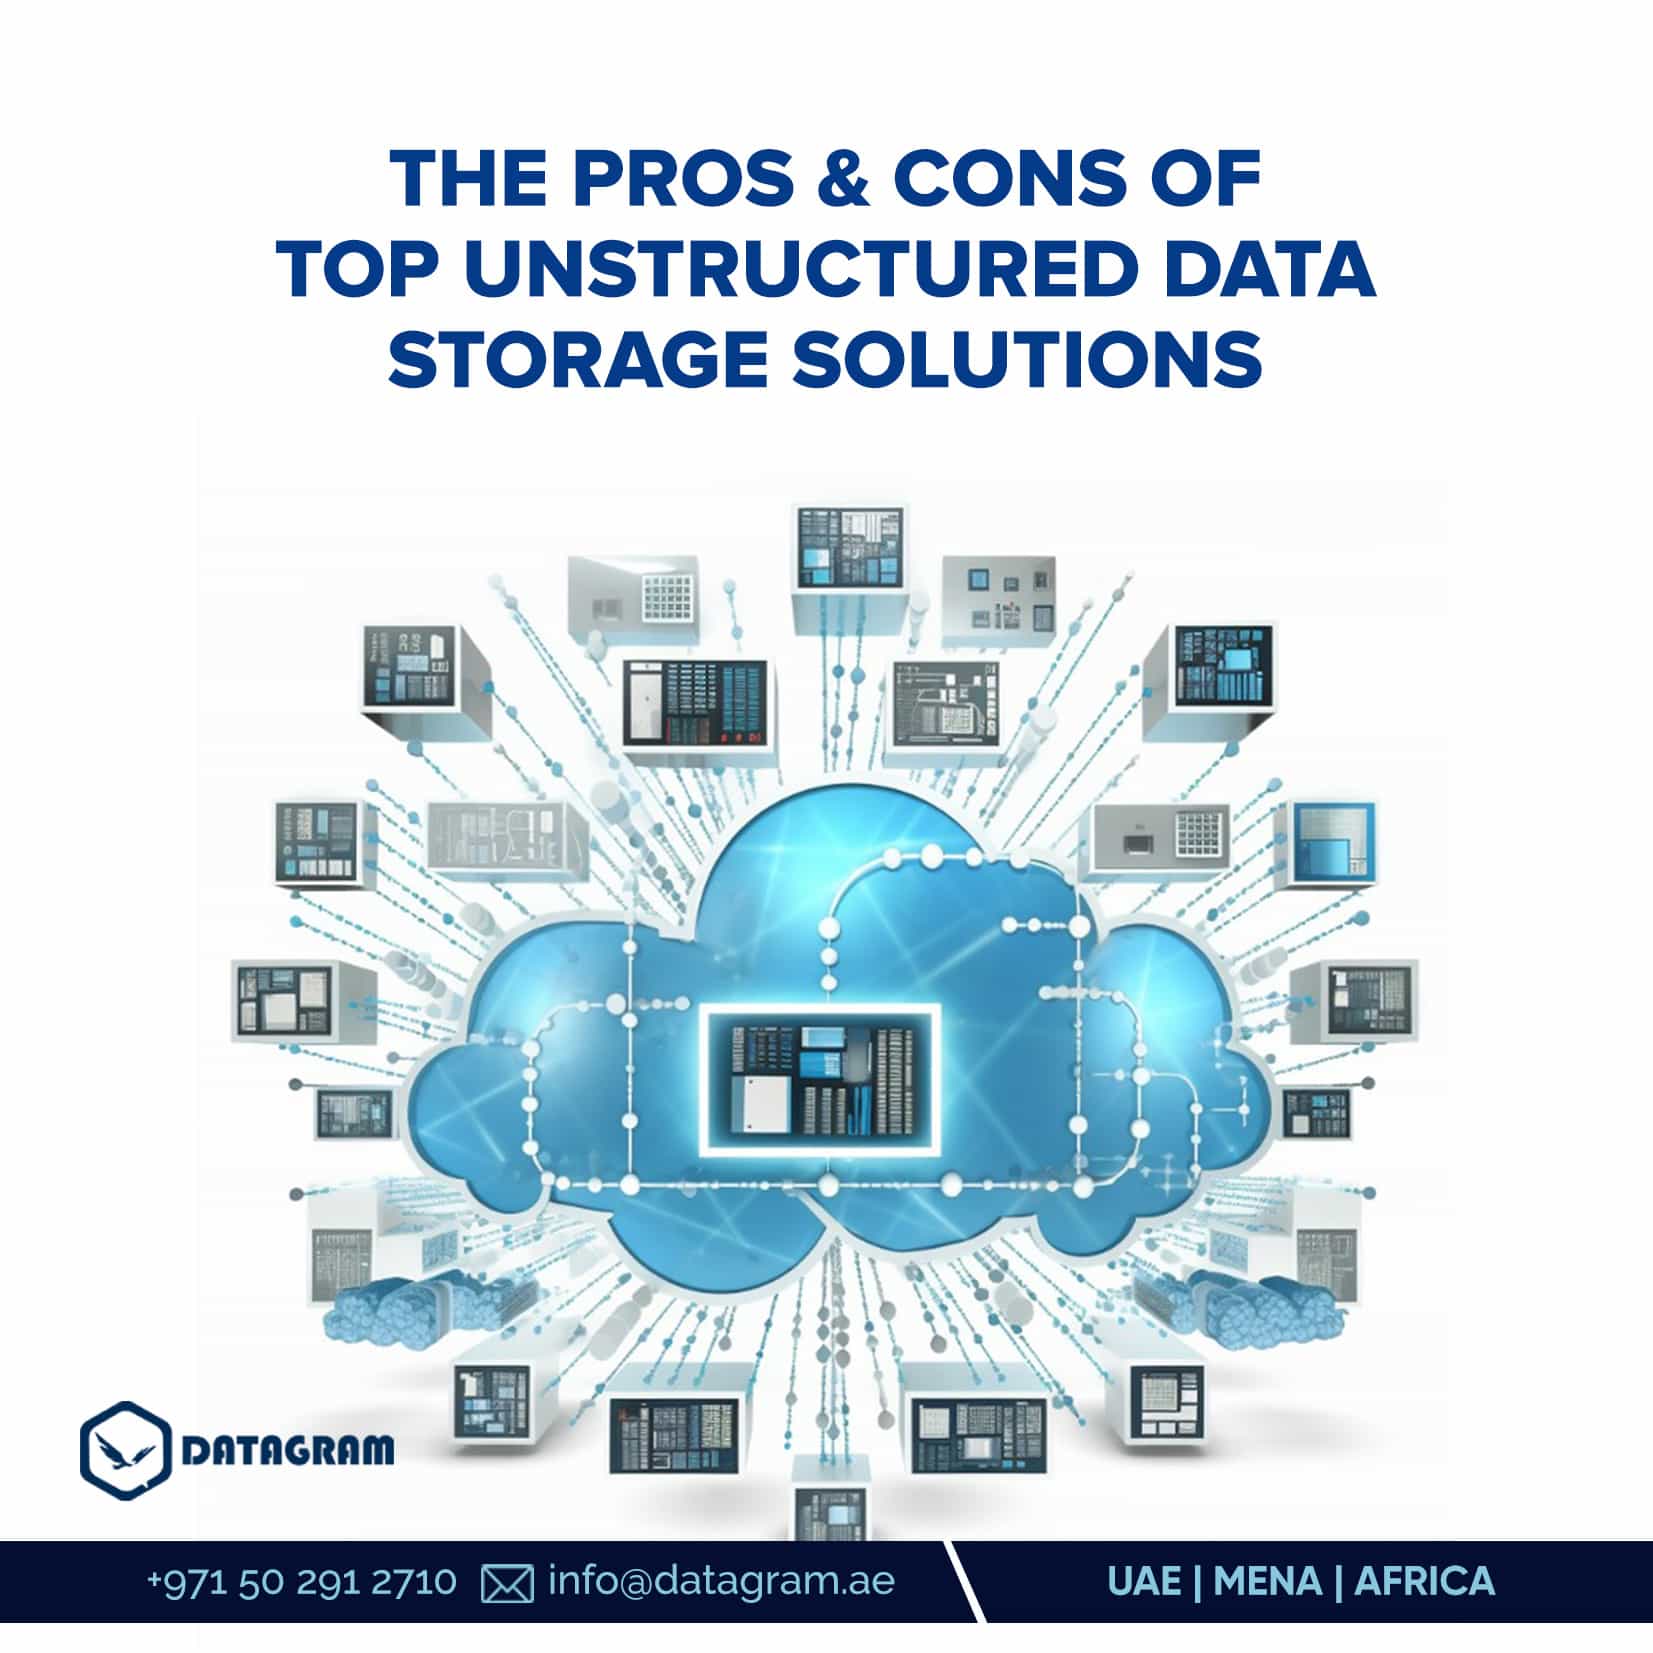 The Pros & Cons of Top Unstructured Data Storage Solutions